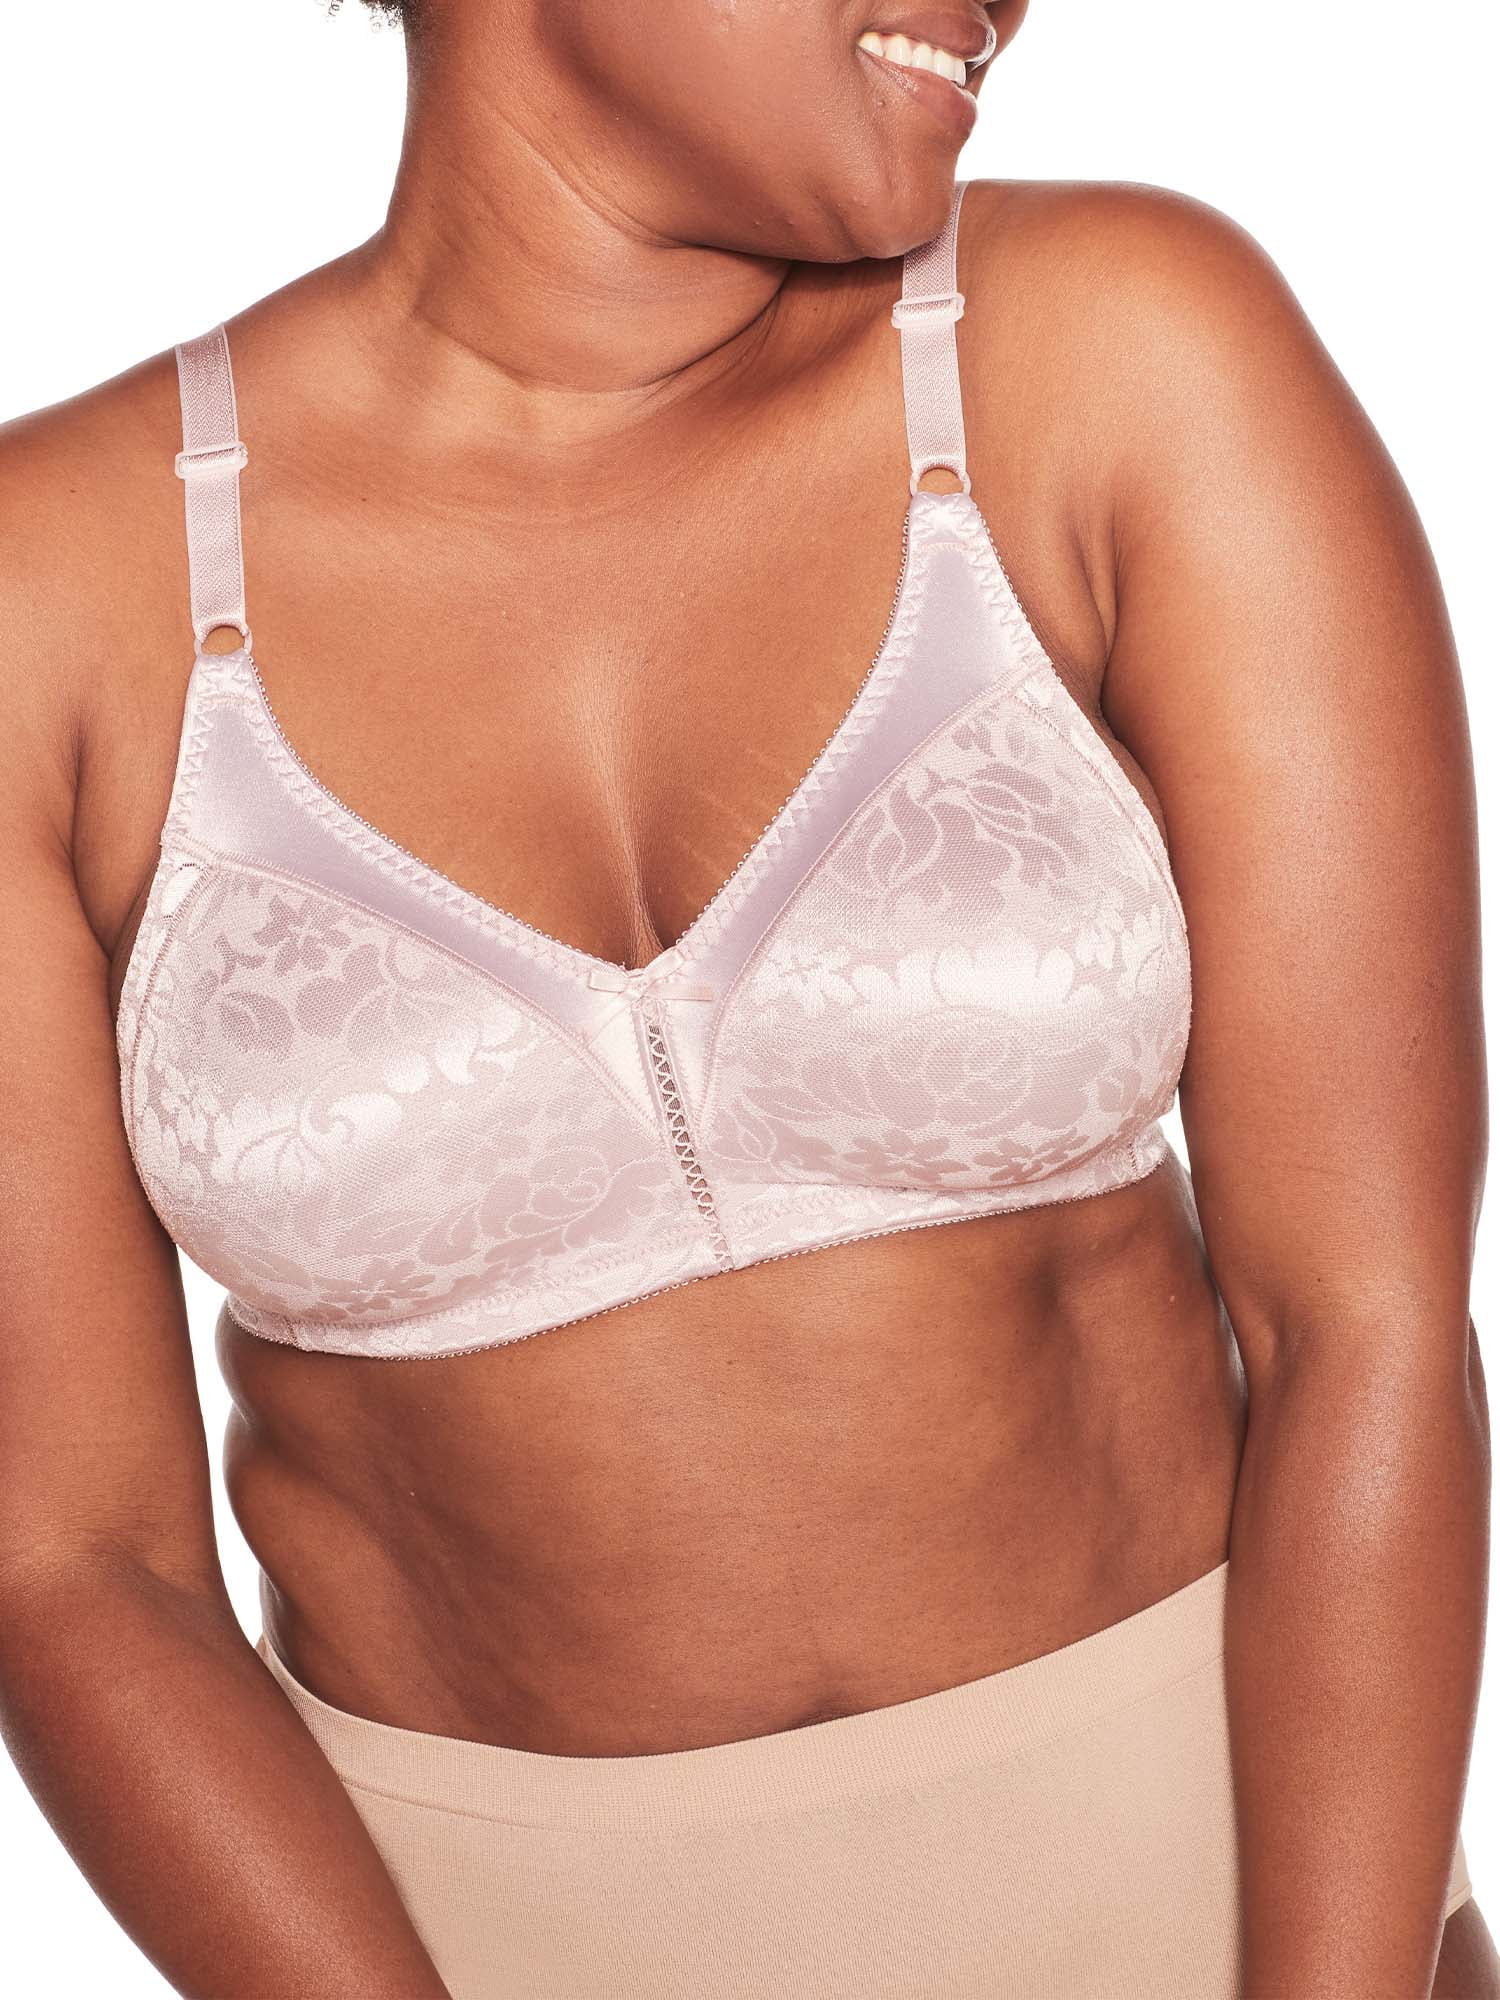 Bali Women's Double Support Wire-free Bra - 3372 34b Soft Taupe : Target